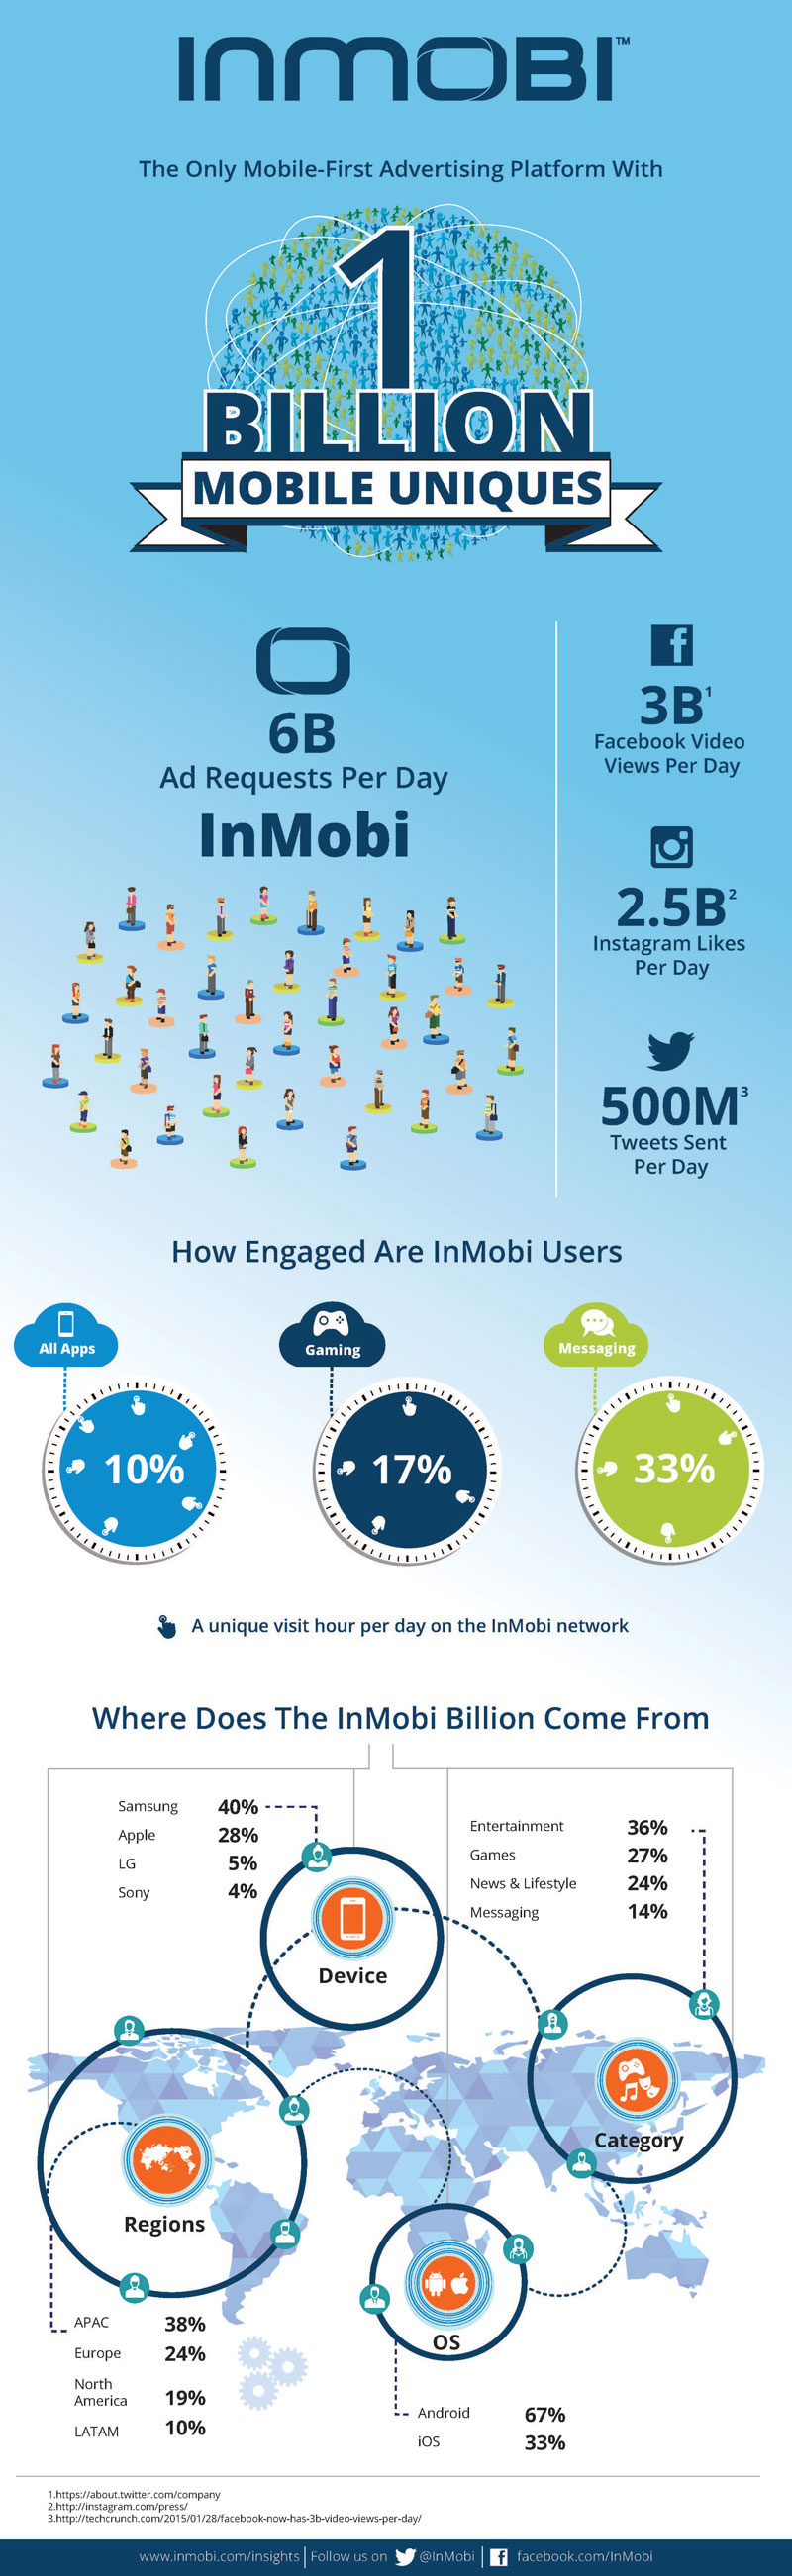 InMobi Reaches Over One Billion Mobile Devices